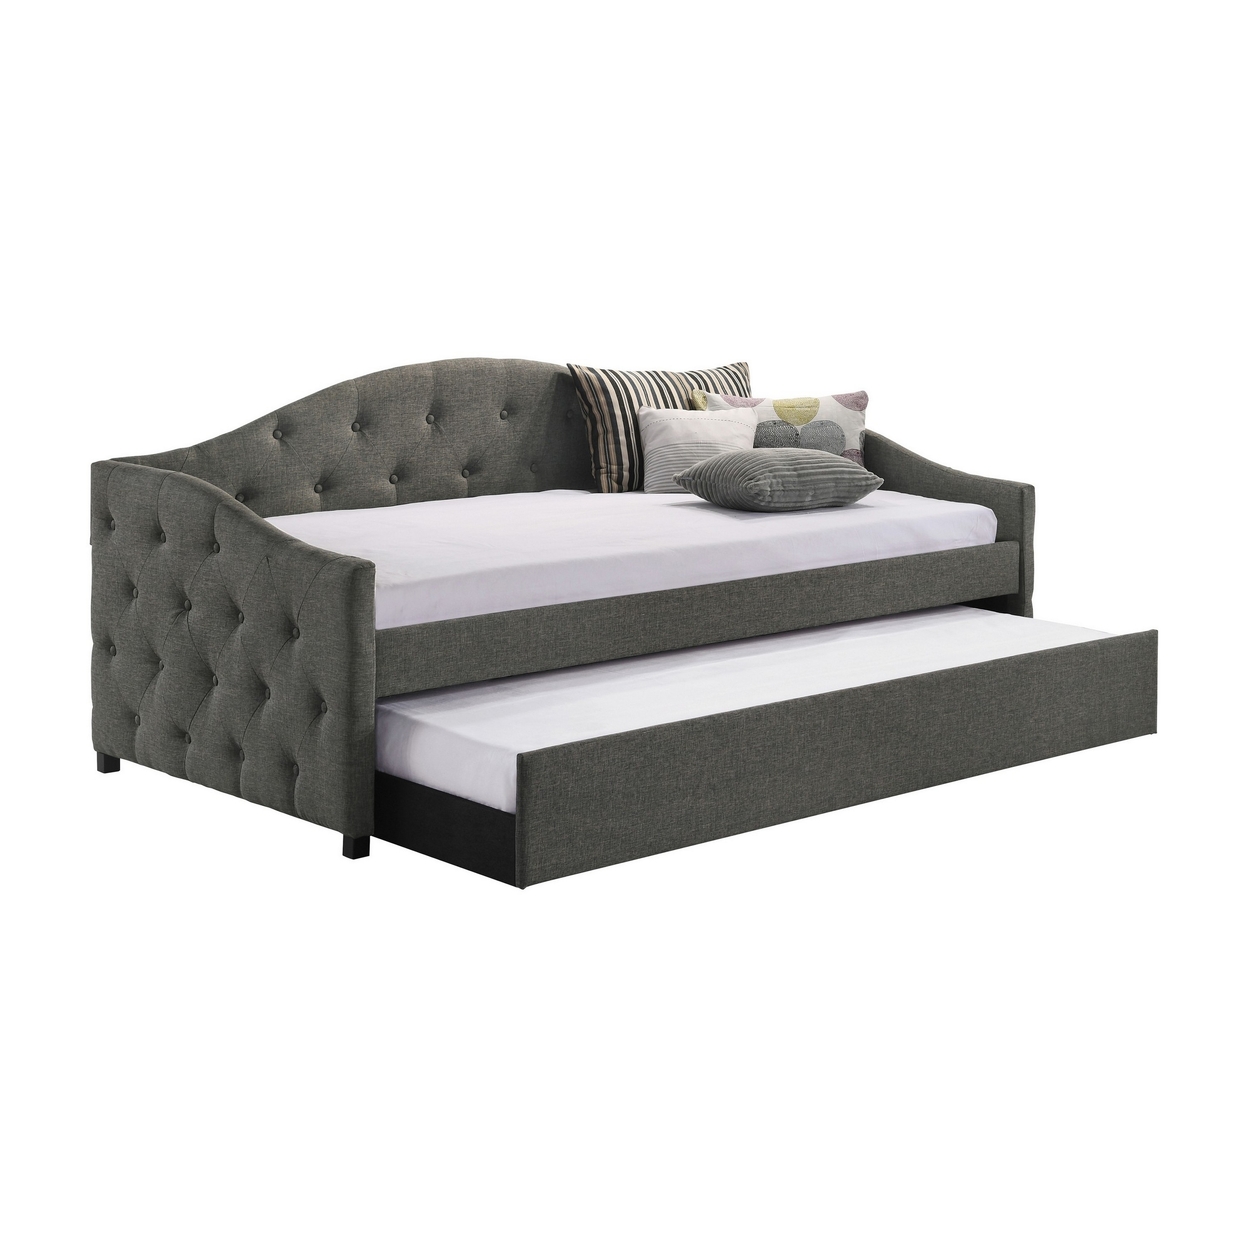 Mosh Twin Daybed With Trundle, Camel Back, Button Tufted, Gray Upholstery- Saltoro Sherpi